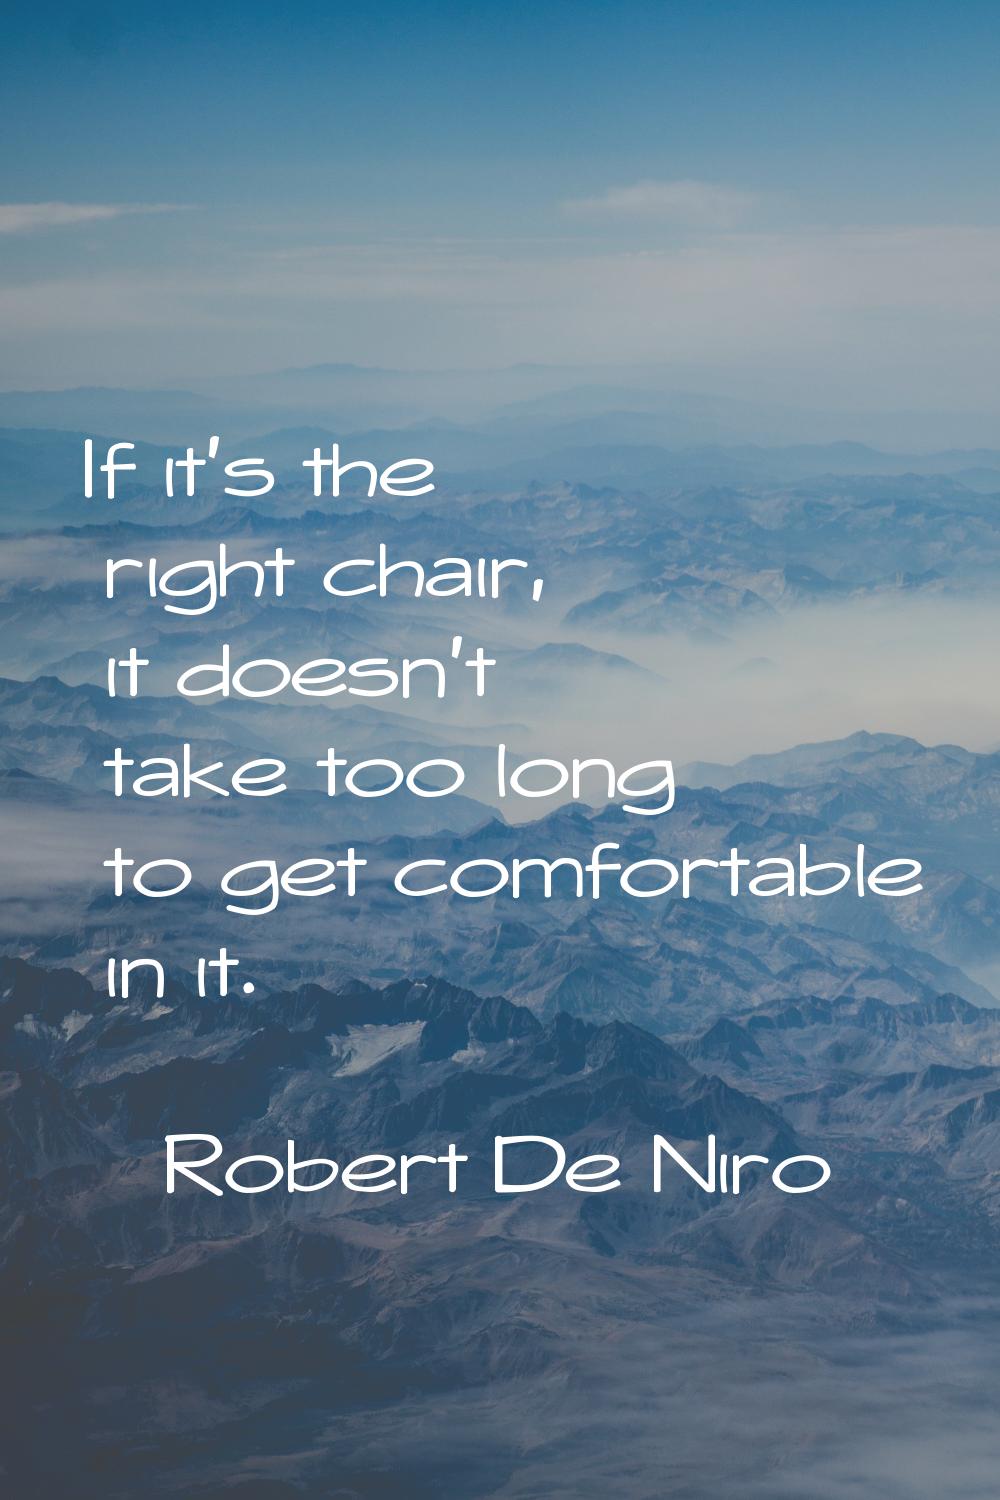 If it's the right chair, it doesn't take too long to get comfortable in it.